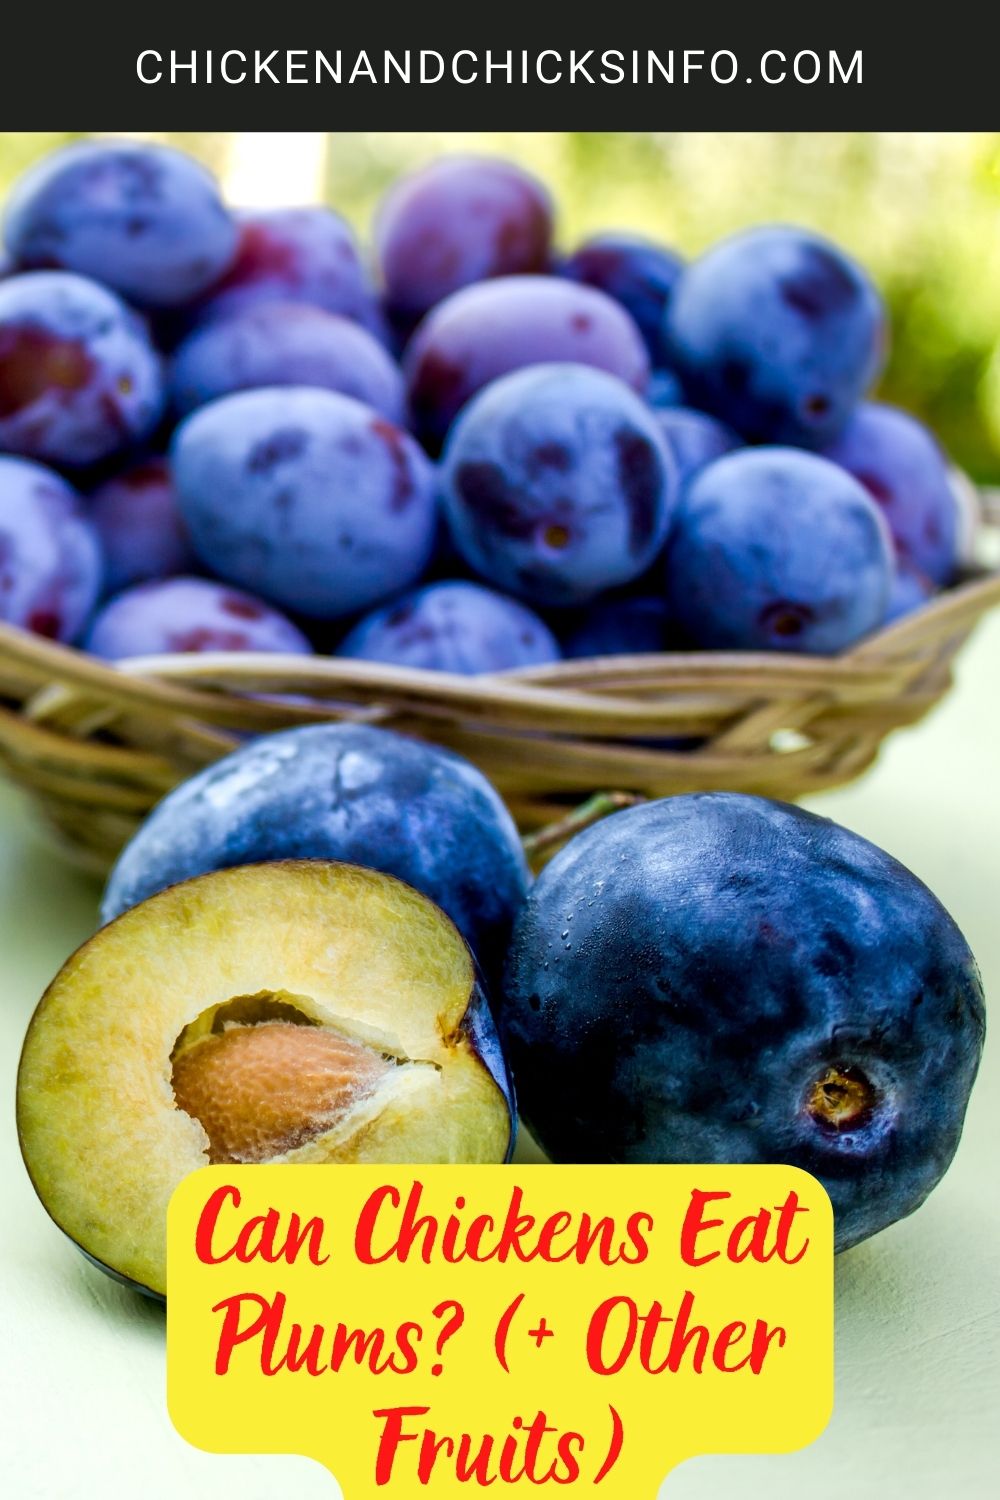 Can Chickens Eat Plums? (+ Other Fruits) poster.
